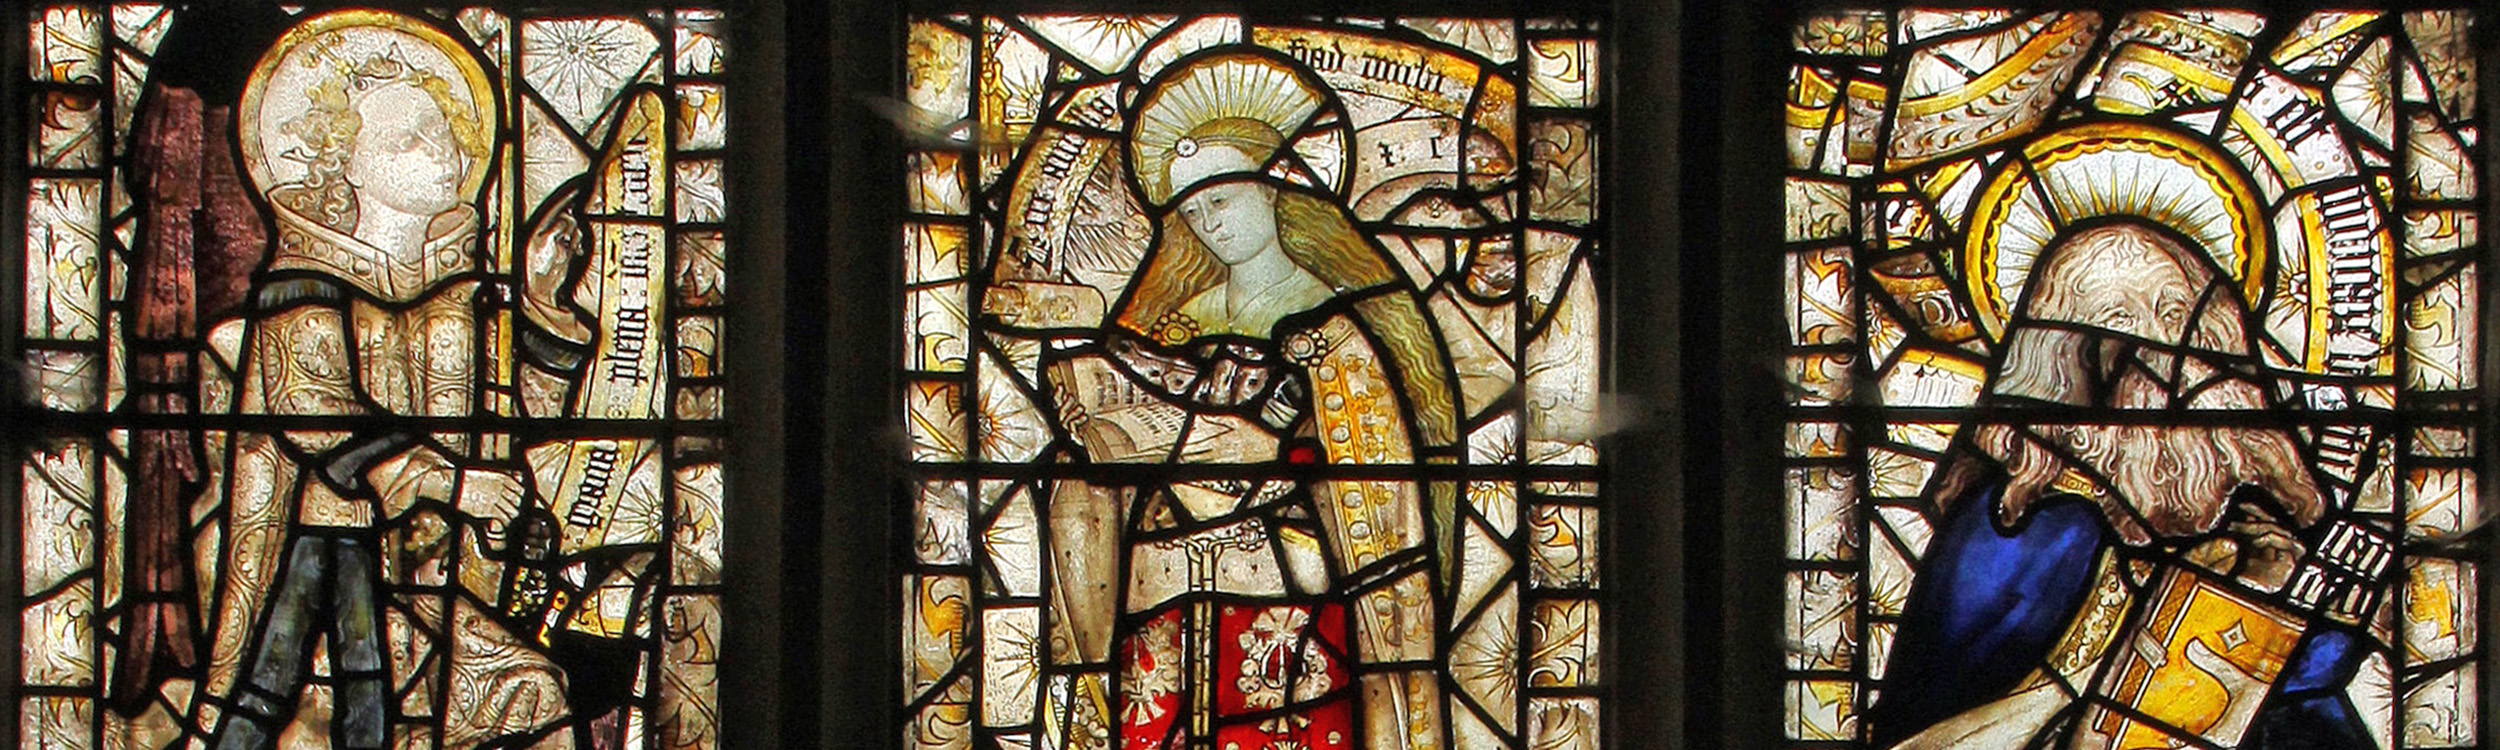 medieval representations of Mary and Gabriel from Annunciation scenes